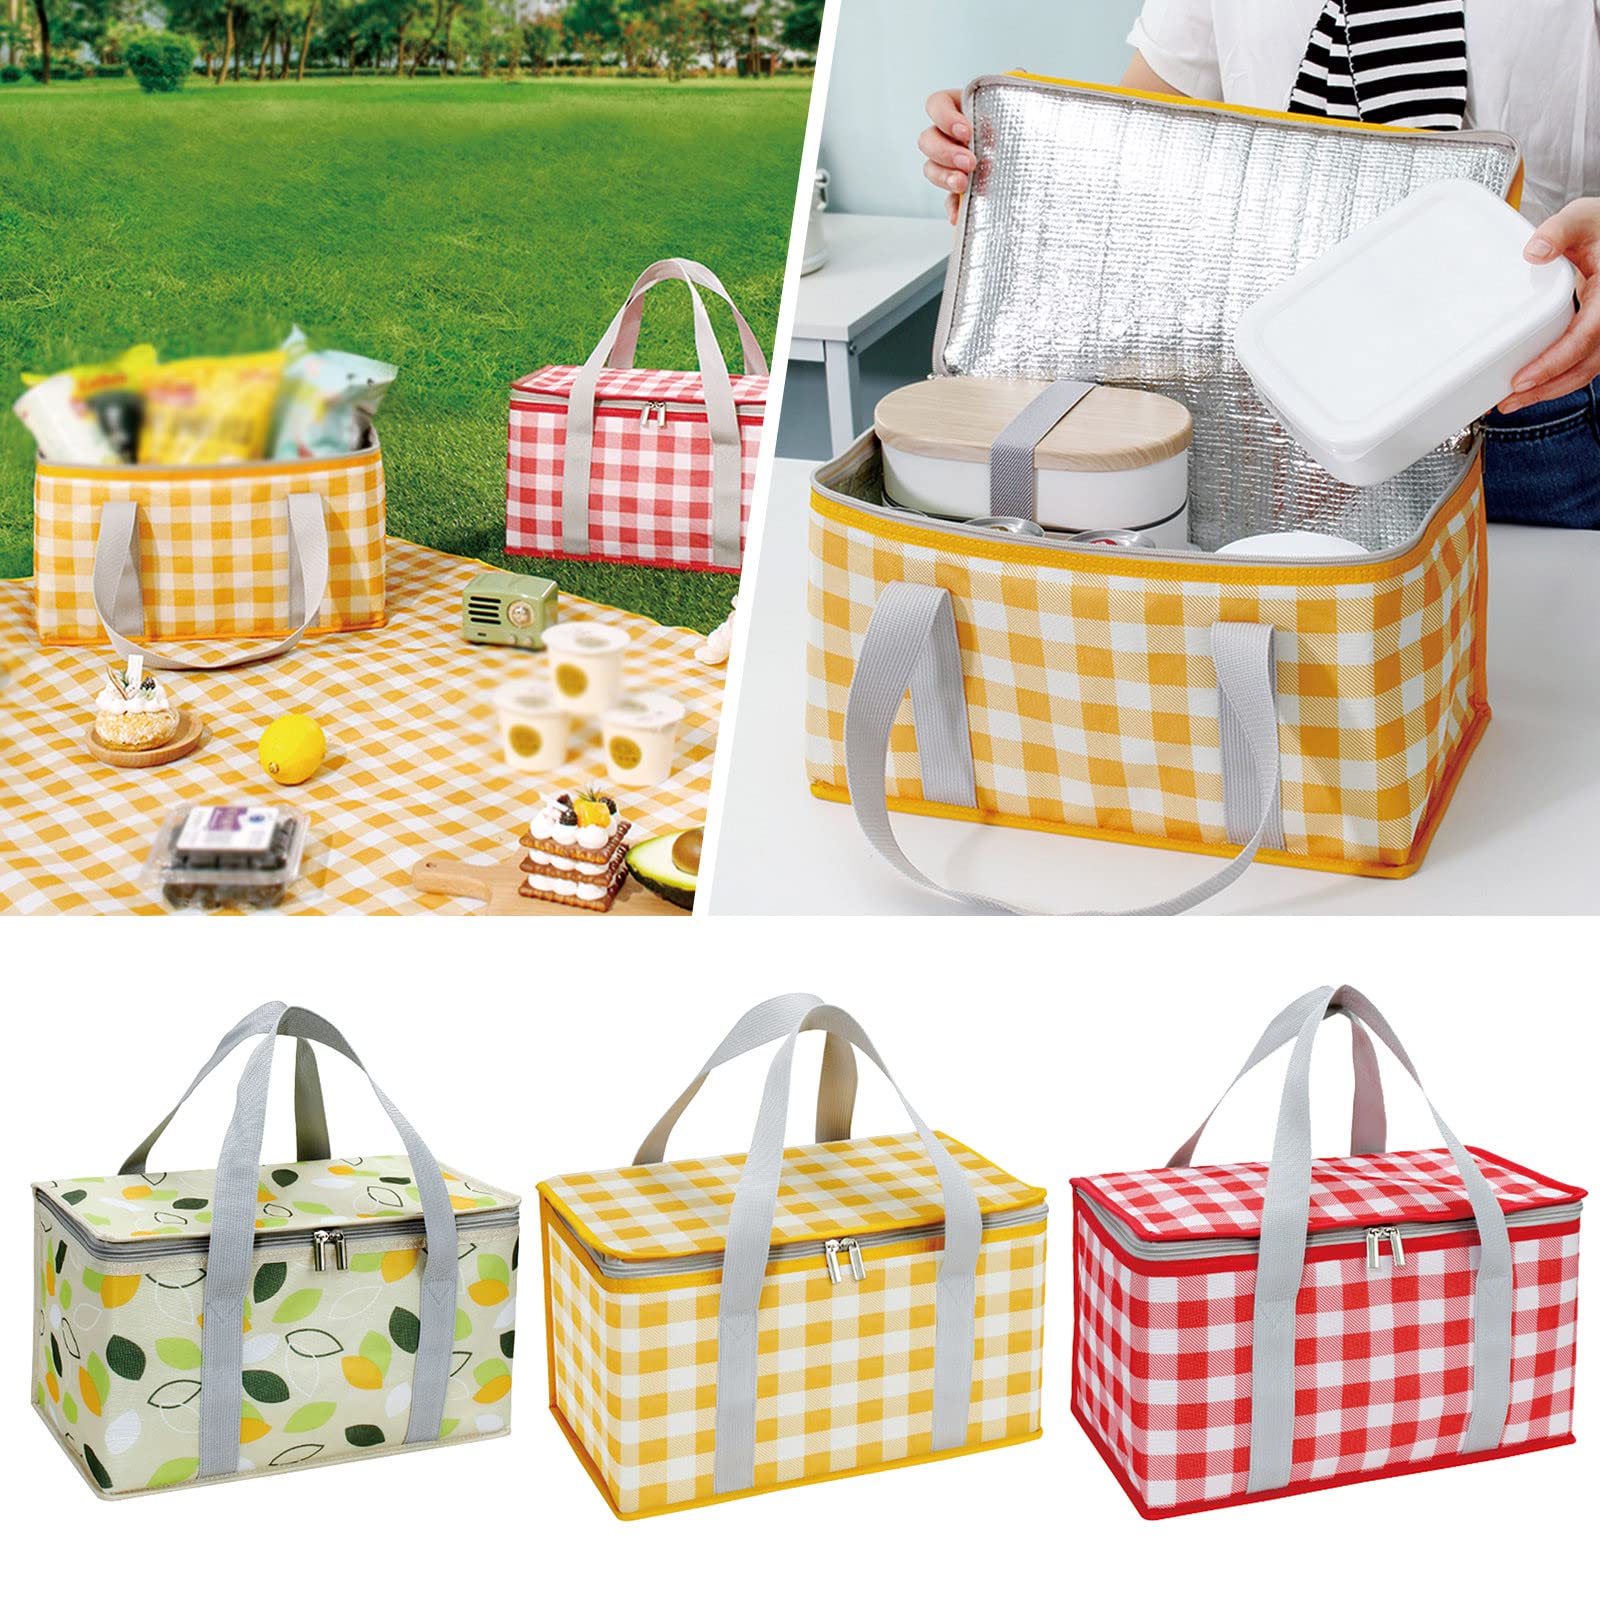 1pc Picnic Basket For 2 Person Heart Shaped Woven Wicker Willow Wood Hamper  Backpack Box With Lid Cover Handle For Gifts